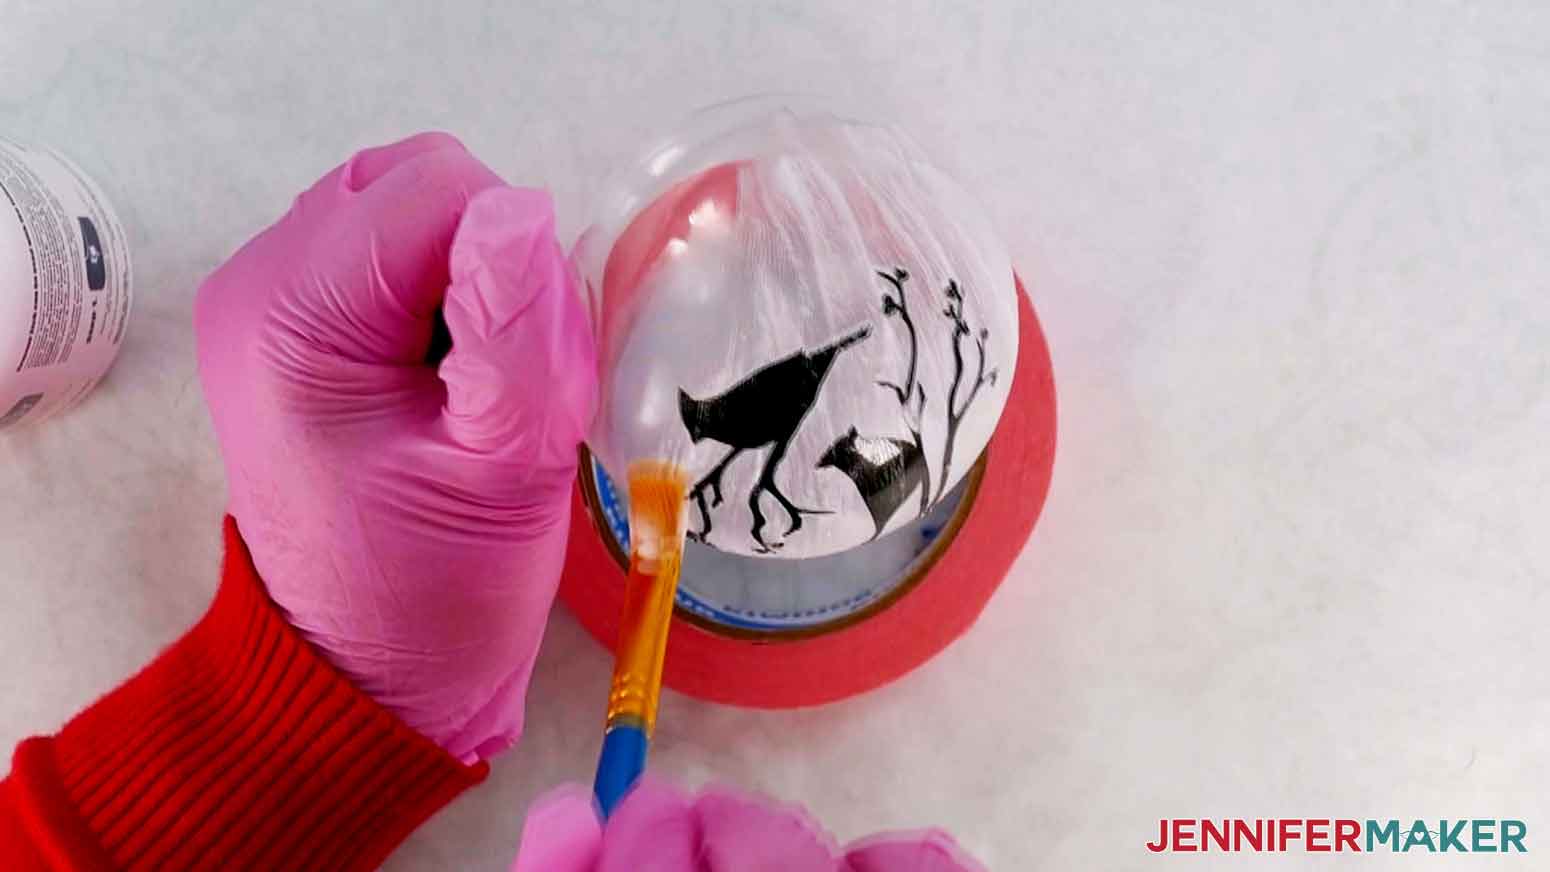 Etching cream being applied with a brush to a glass ornament with a black vinyl cardinal stencil attached